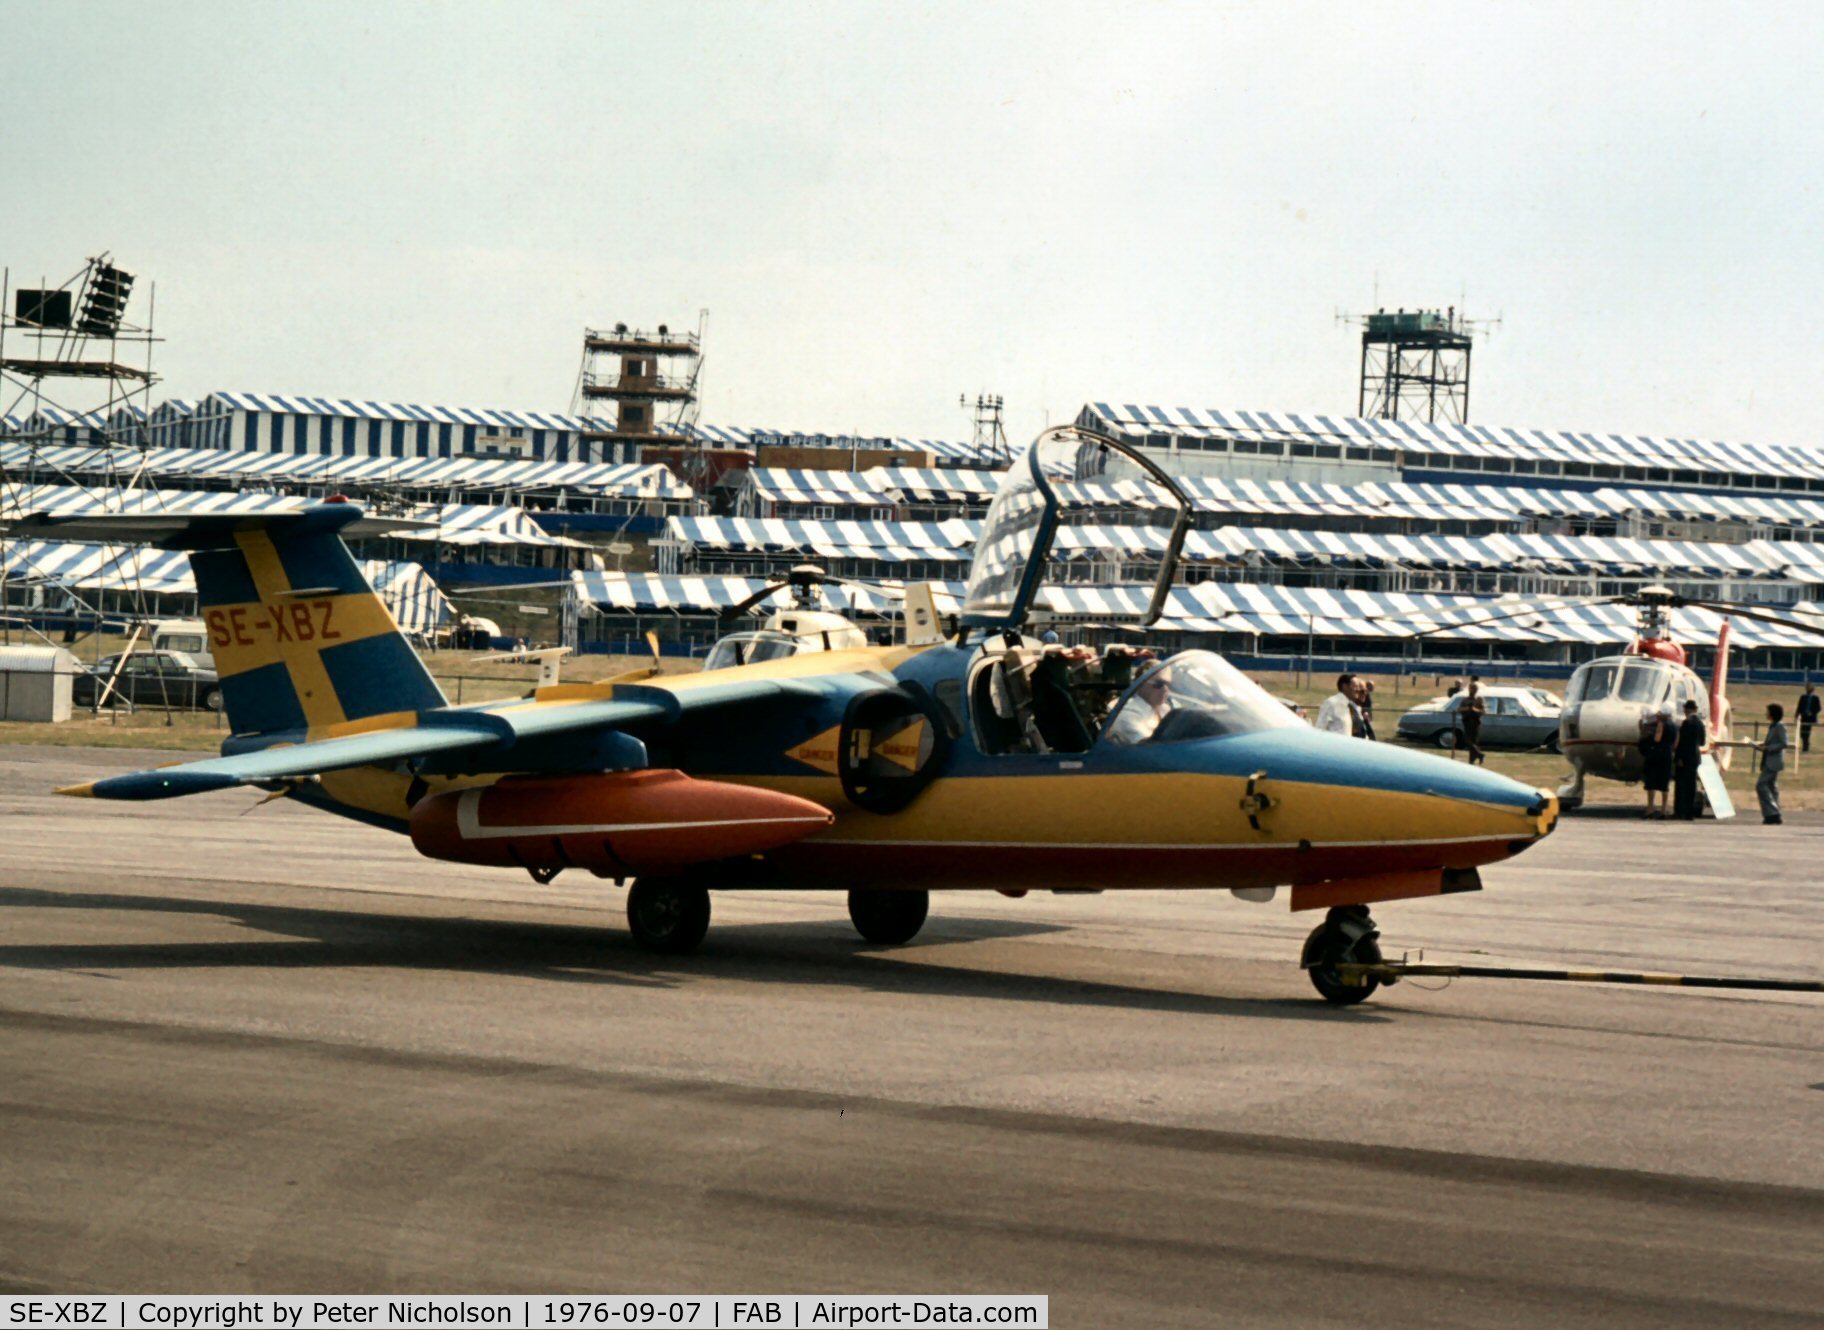 SE-XBZ, 1964 Saab 105XT C/N 105-2, This demonstrator was displayed at the 1976 Farnborough Airshow and is now with Svedinos Museum, Ugglarp, Sweden.